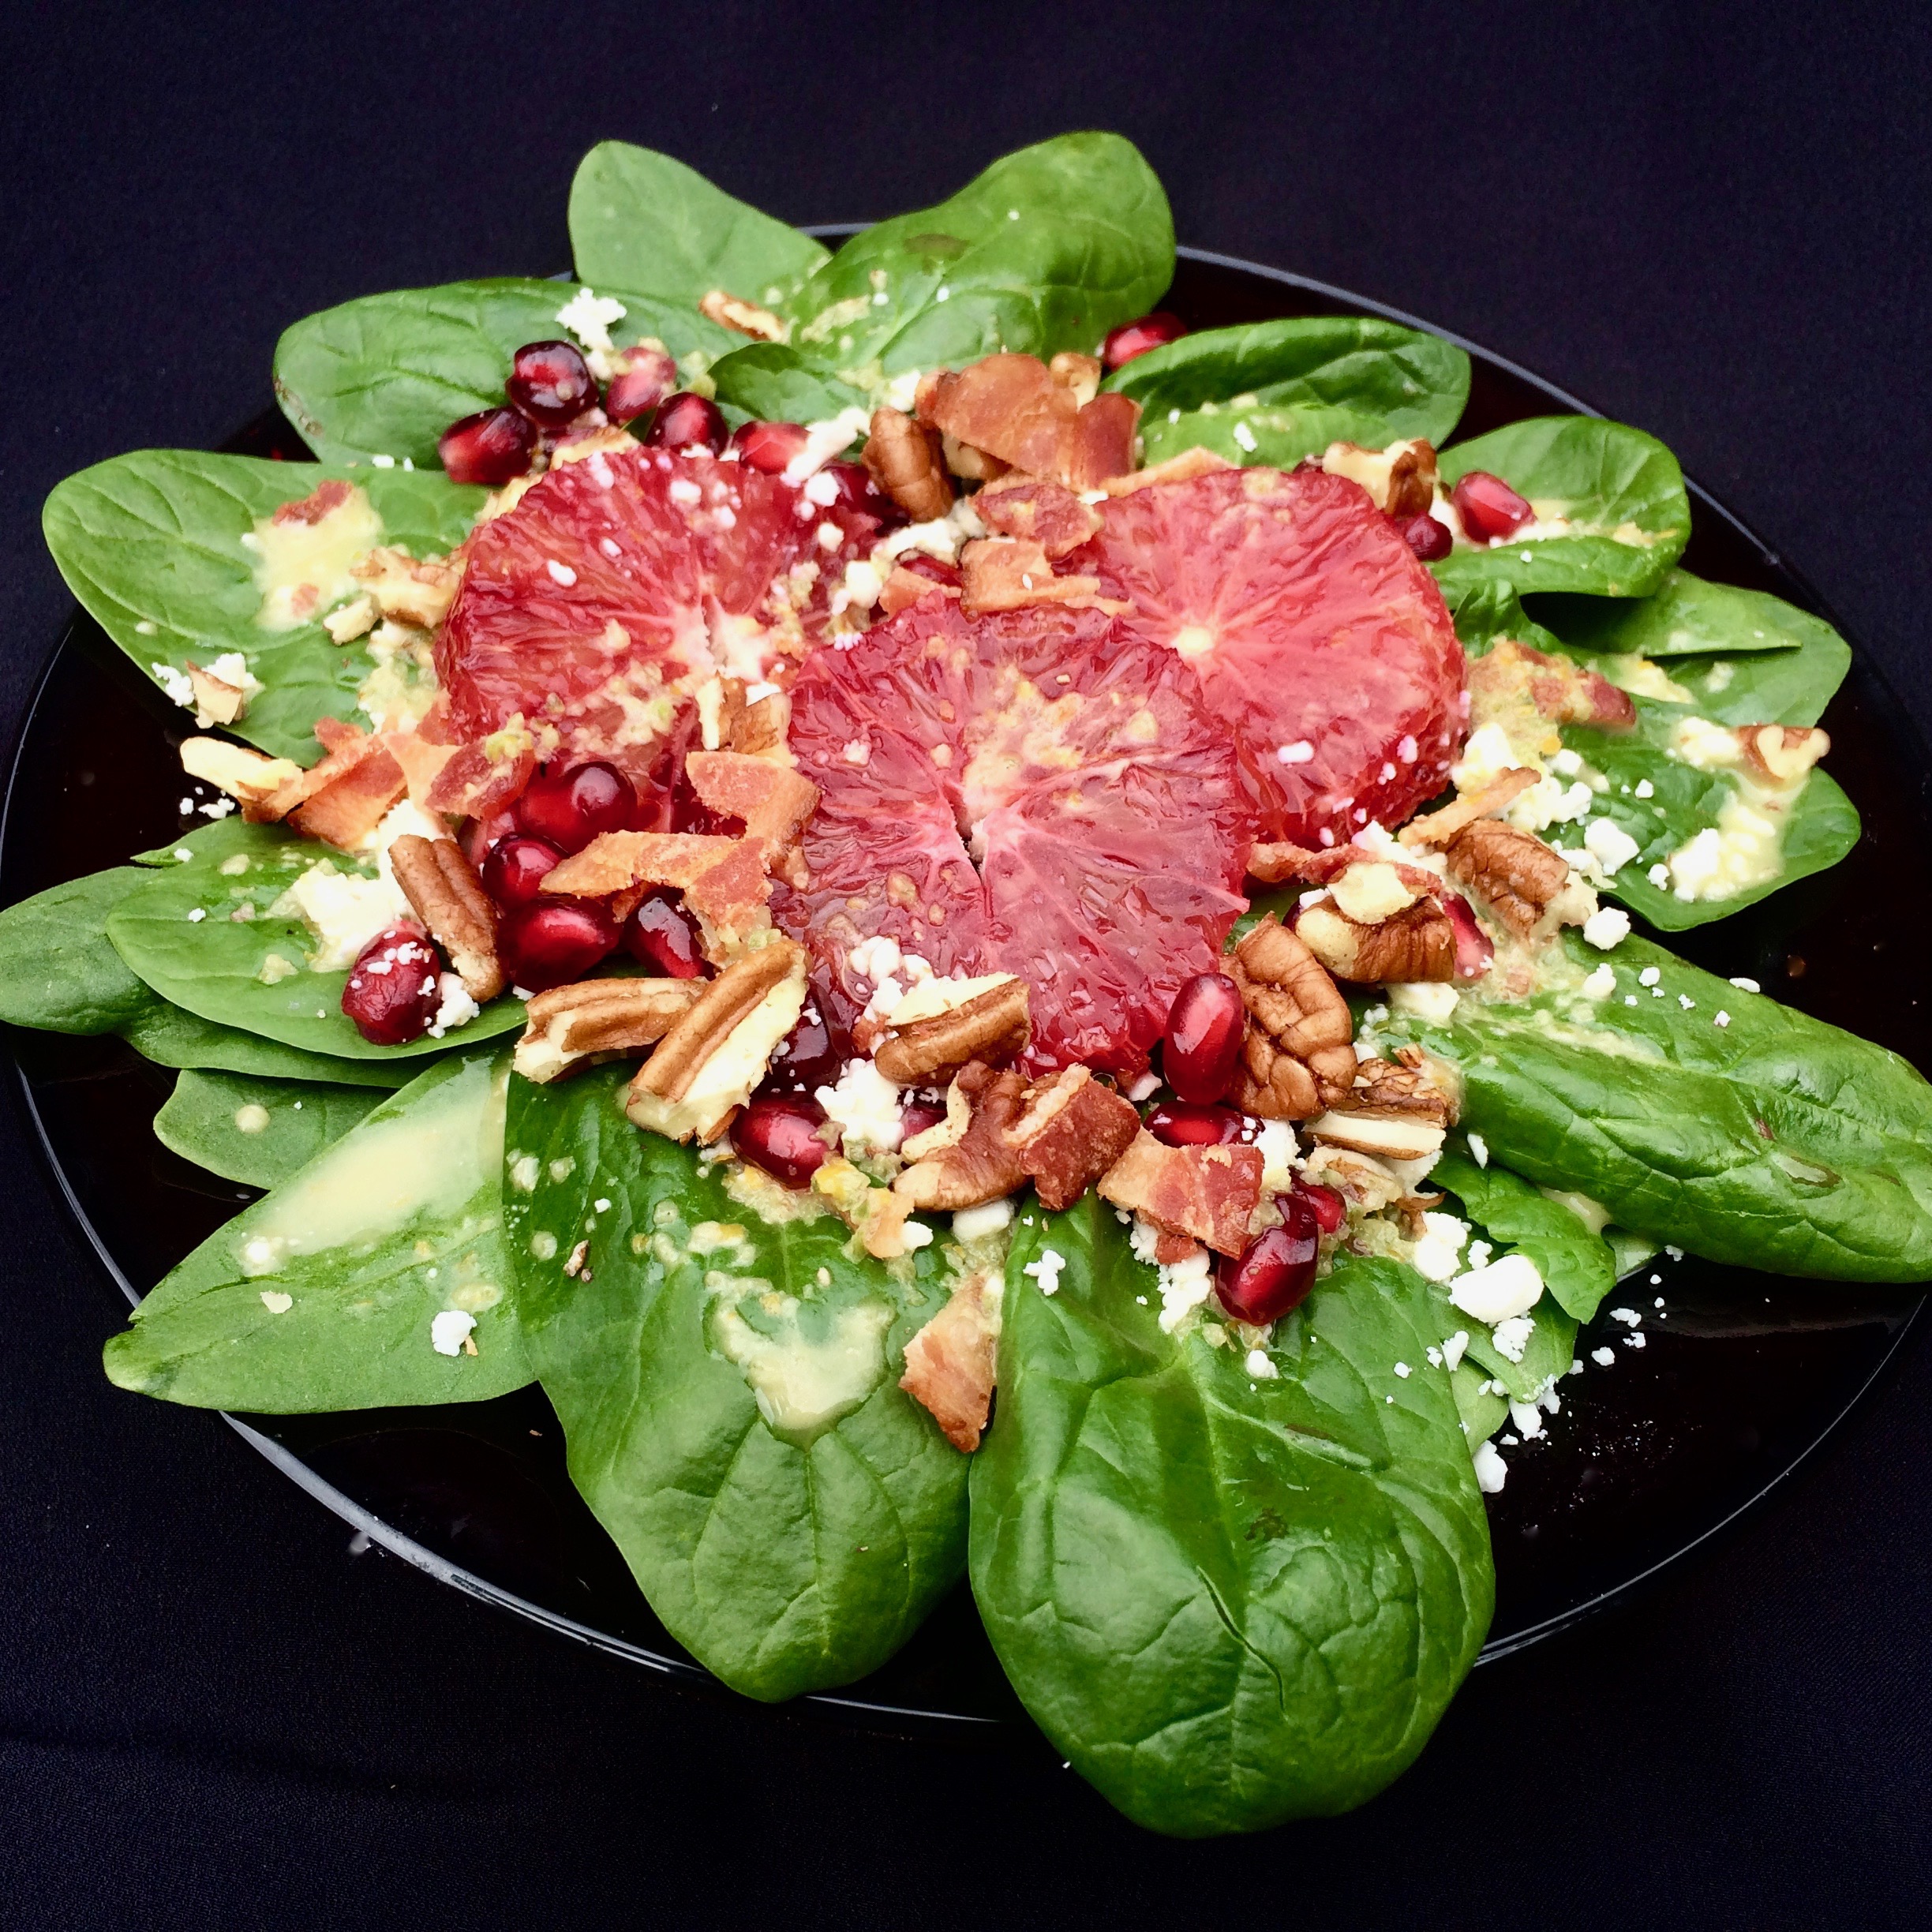 Blood Orange and Spinach Salad with Jalapeno Vinaigrette